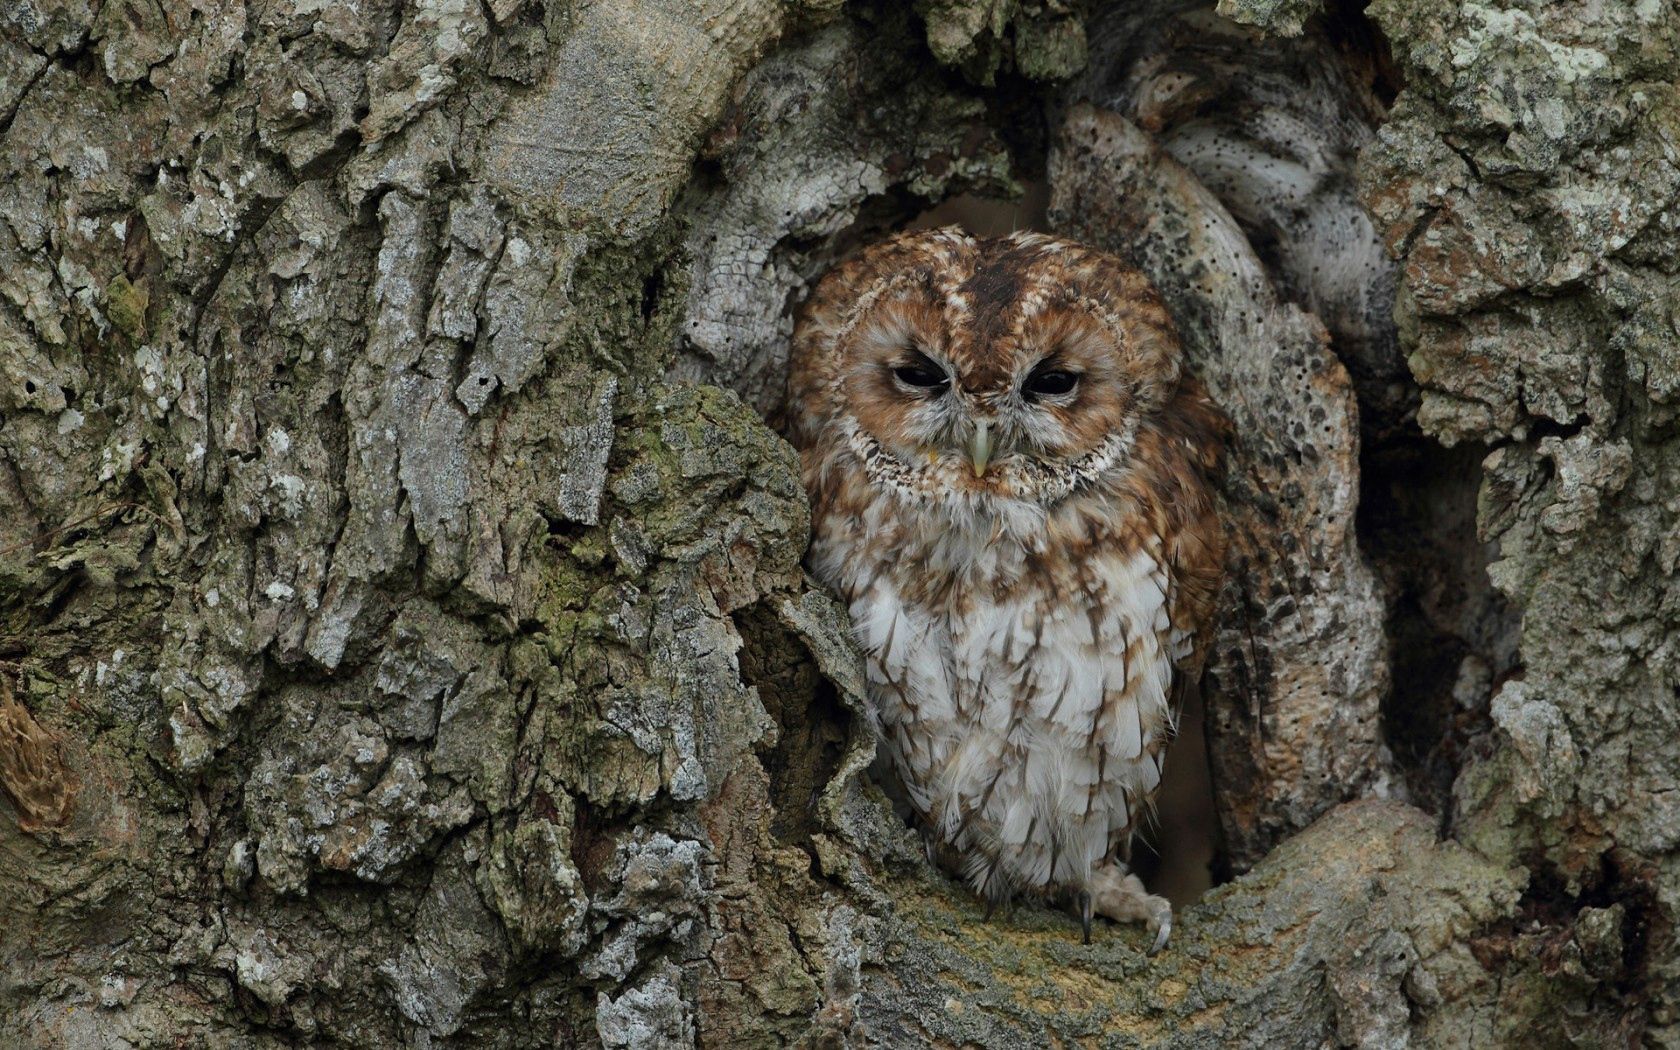 113045 download wallpaper animals, owl, bird, wood, tree, disguise, camouflage, bark, trunk screensavers and pictures for free